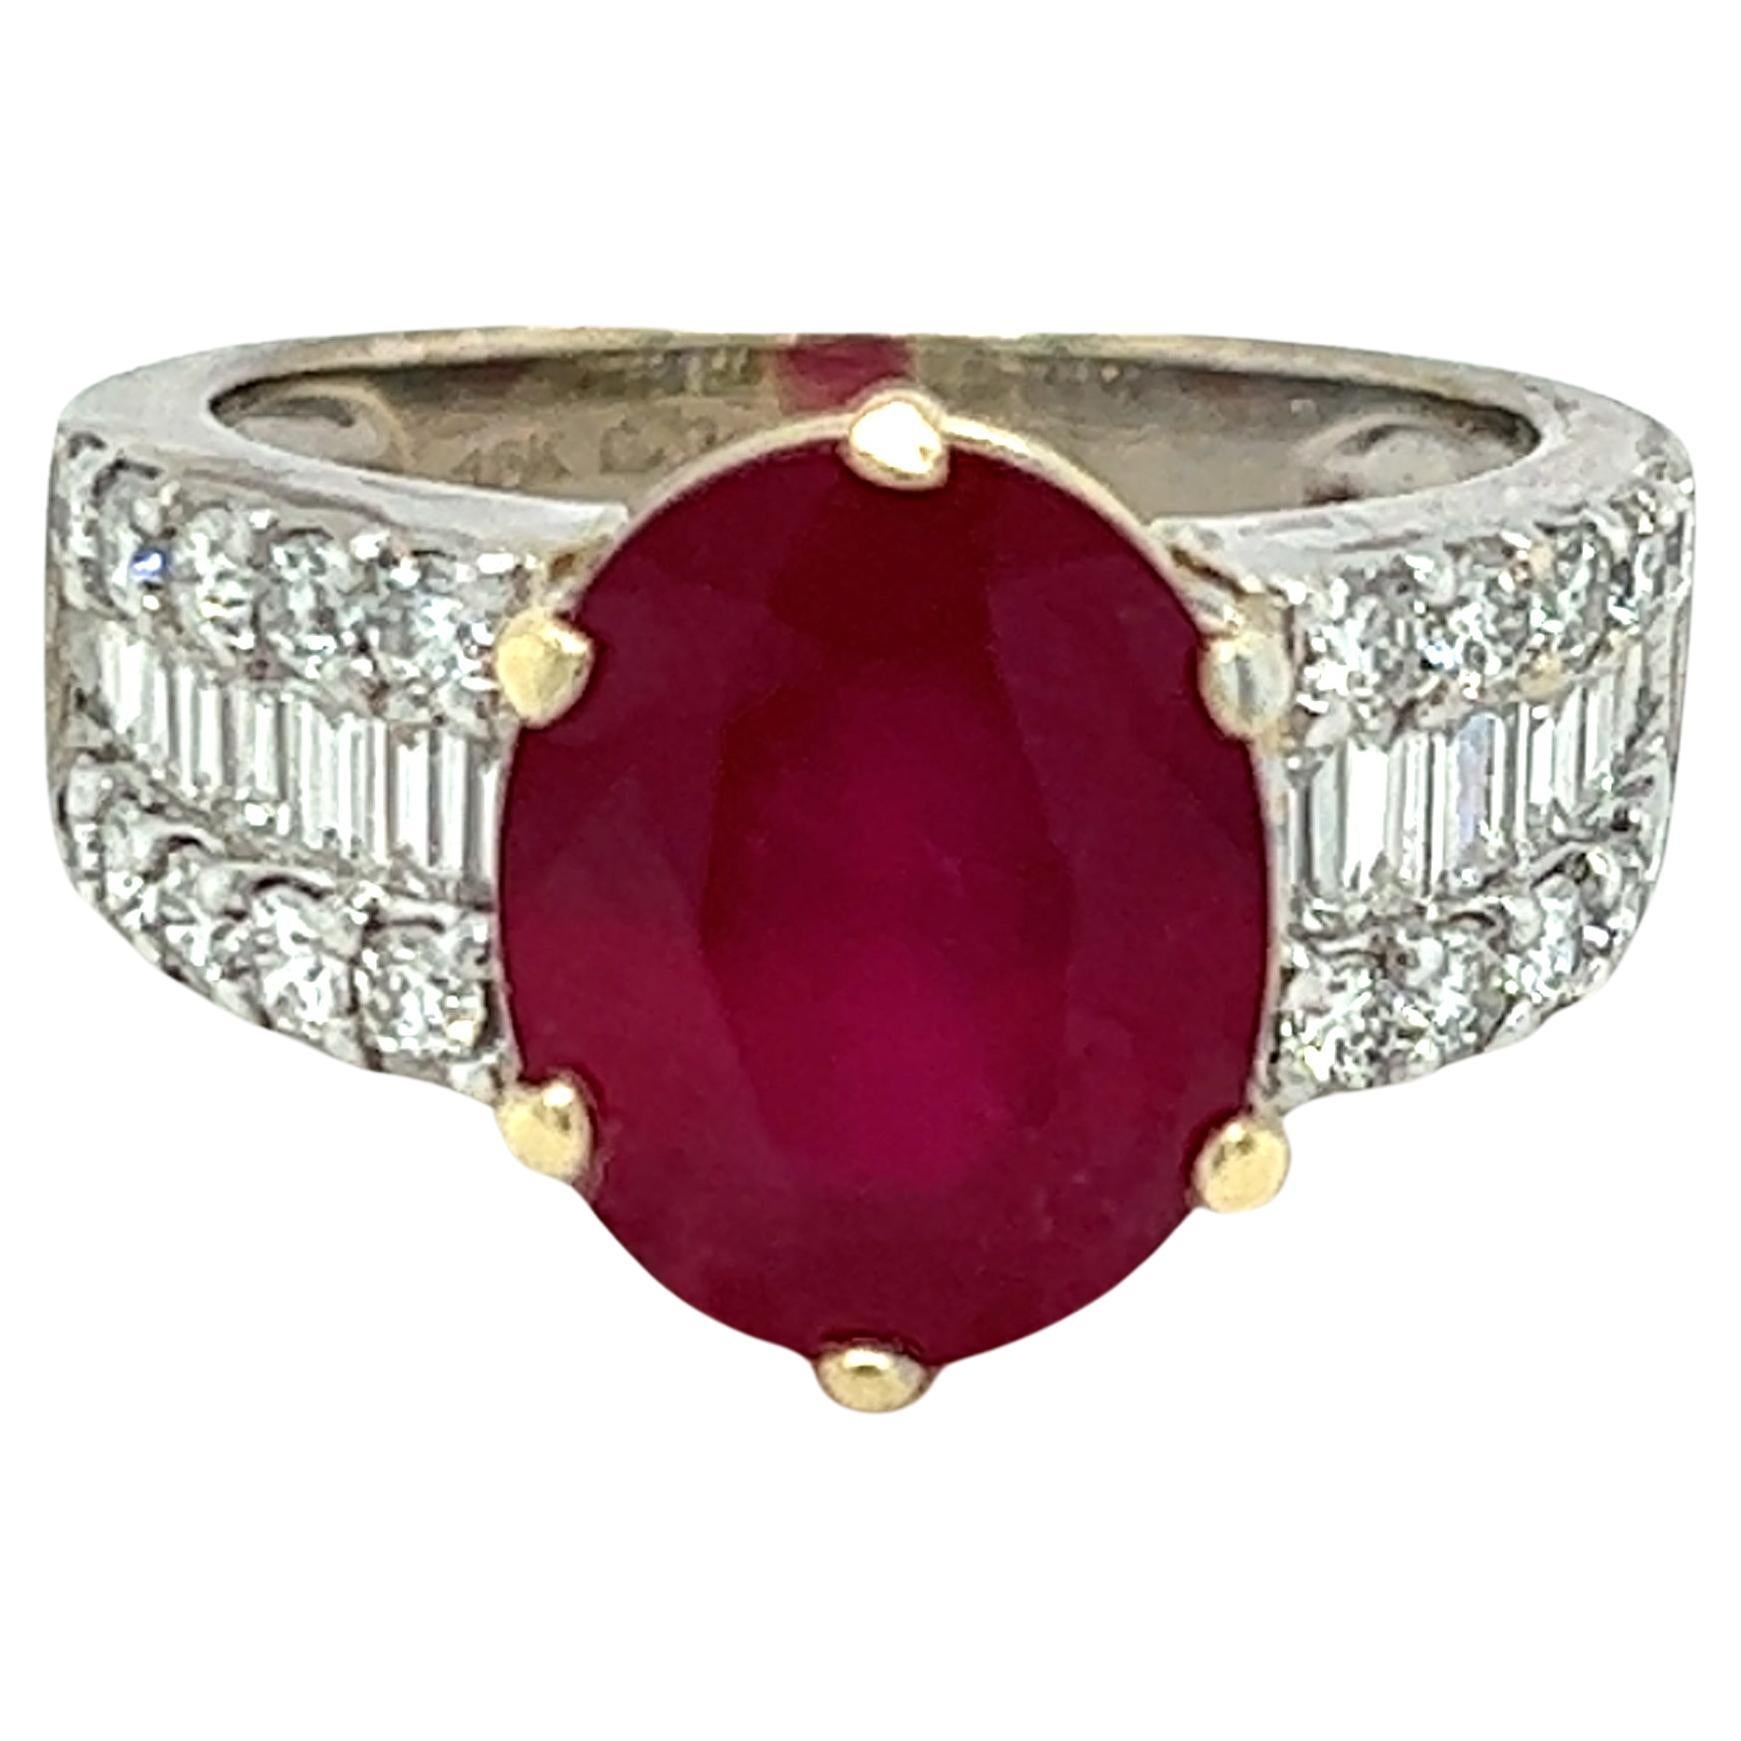 Oval 5.71 Carat Natural Ruby & Diamond Ring in 18K Gold